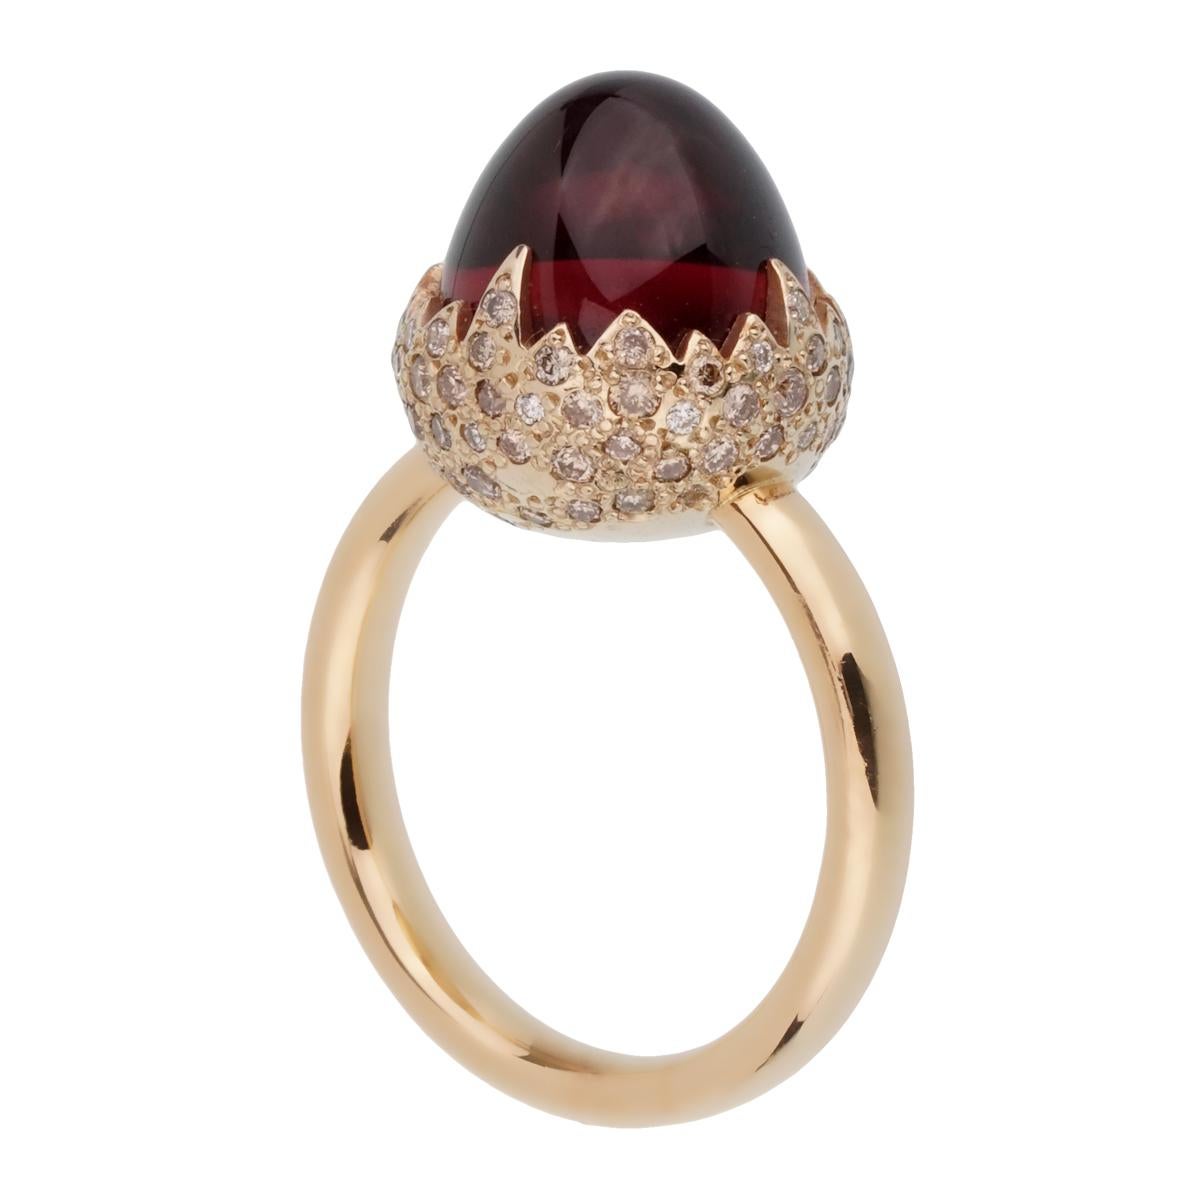 An iconic Pomellato diamond ring showcasing a 6.19ct Garnet encased by .59ct of round brilliant cut diamonds in shimmering 18k gold. The ring measures a size 6 and can be resized

Pomellato Retail: $9450
